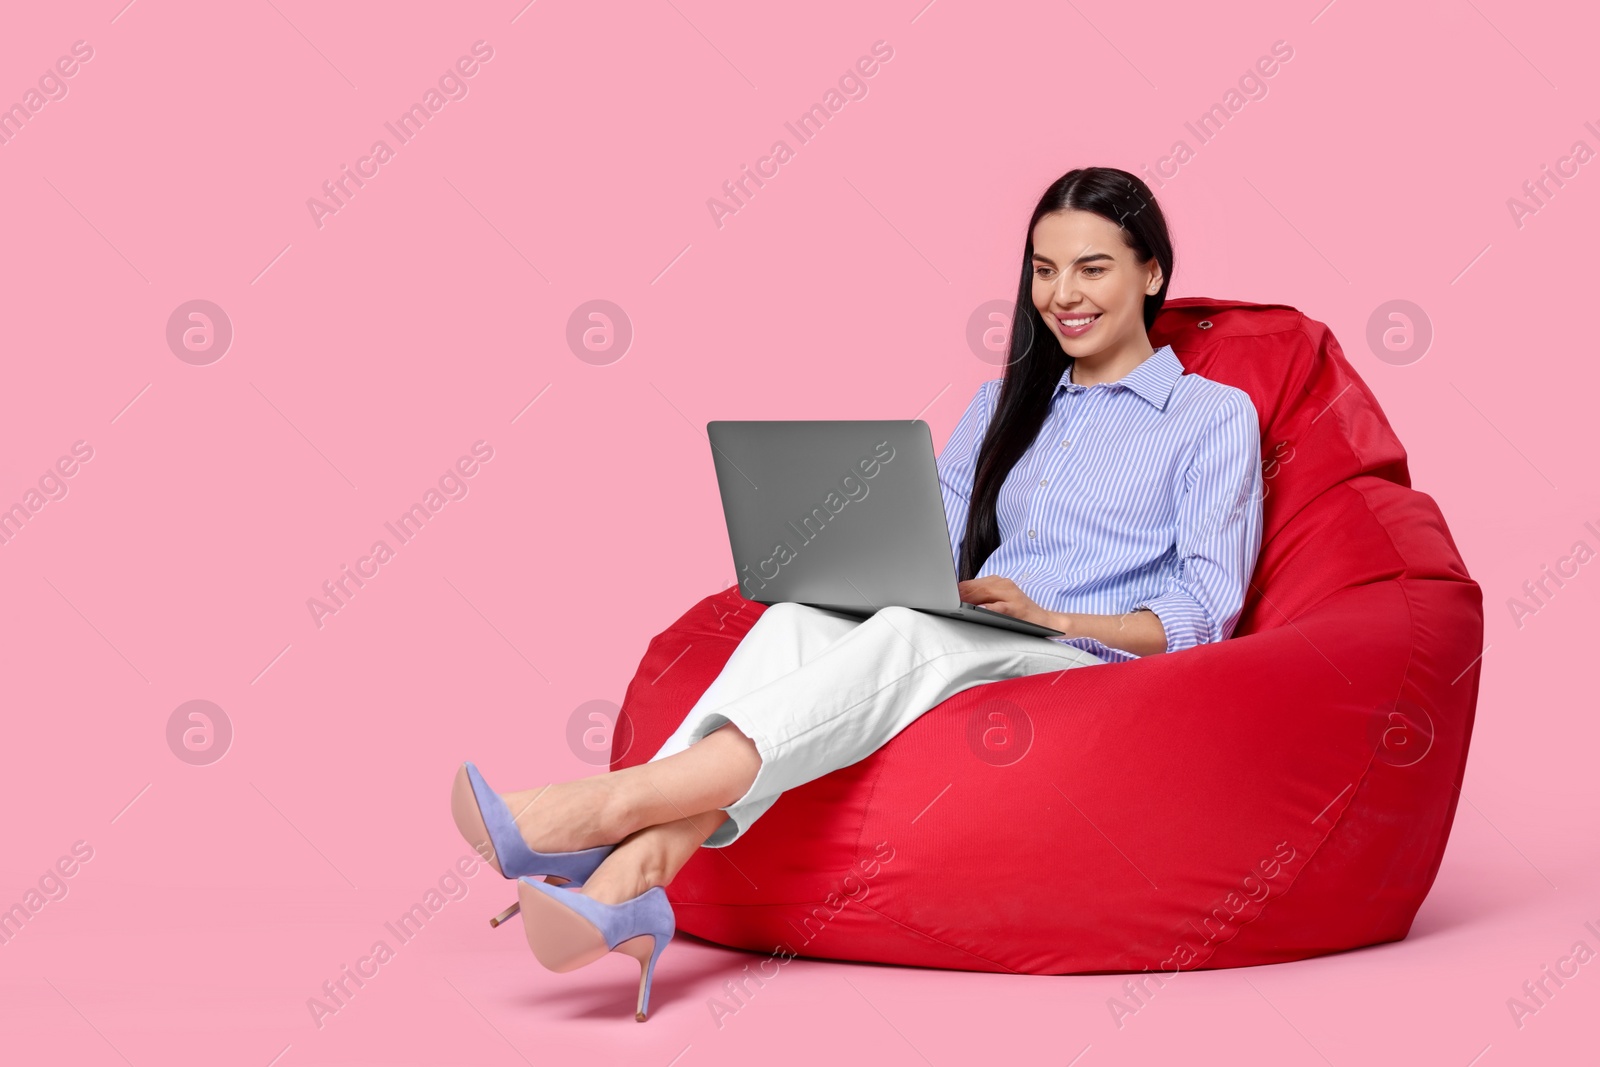 Photo of Happy woman with laptop sitting on beanbag chair against pink background